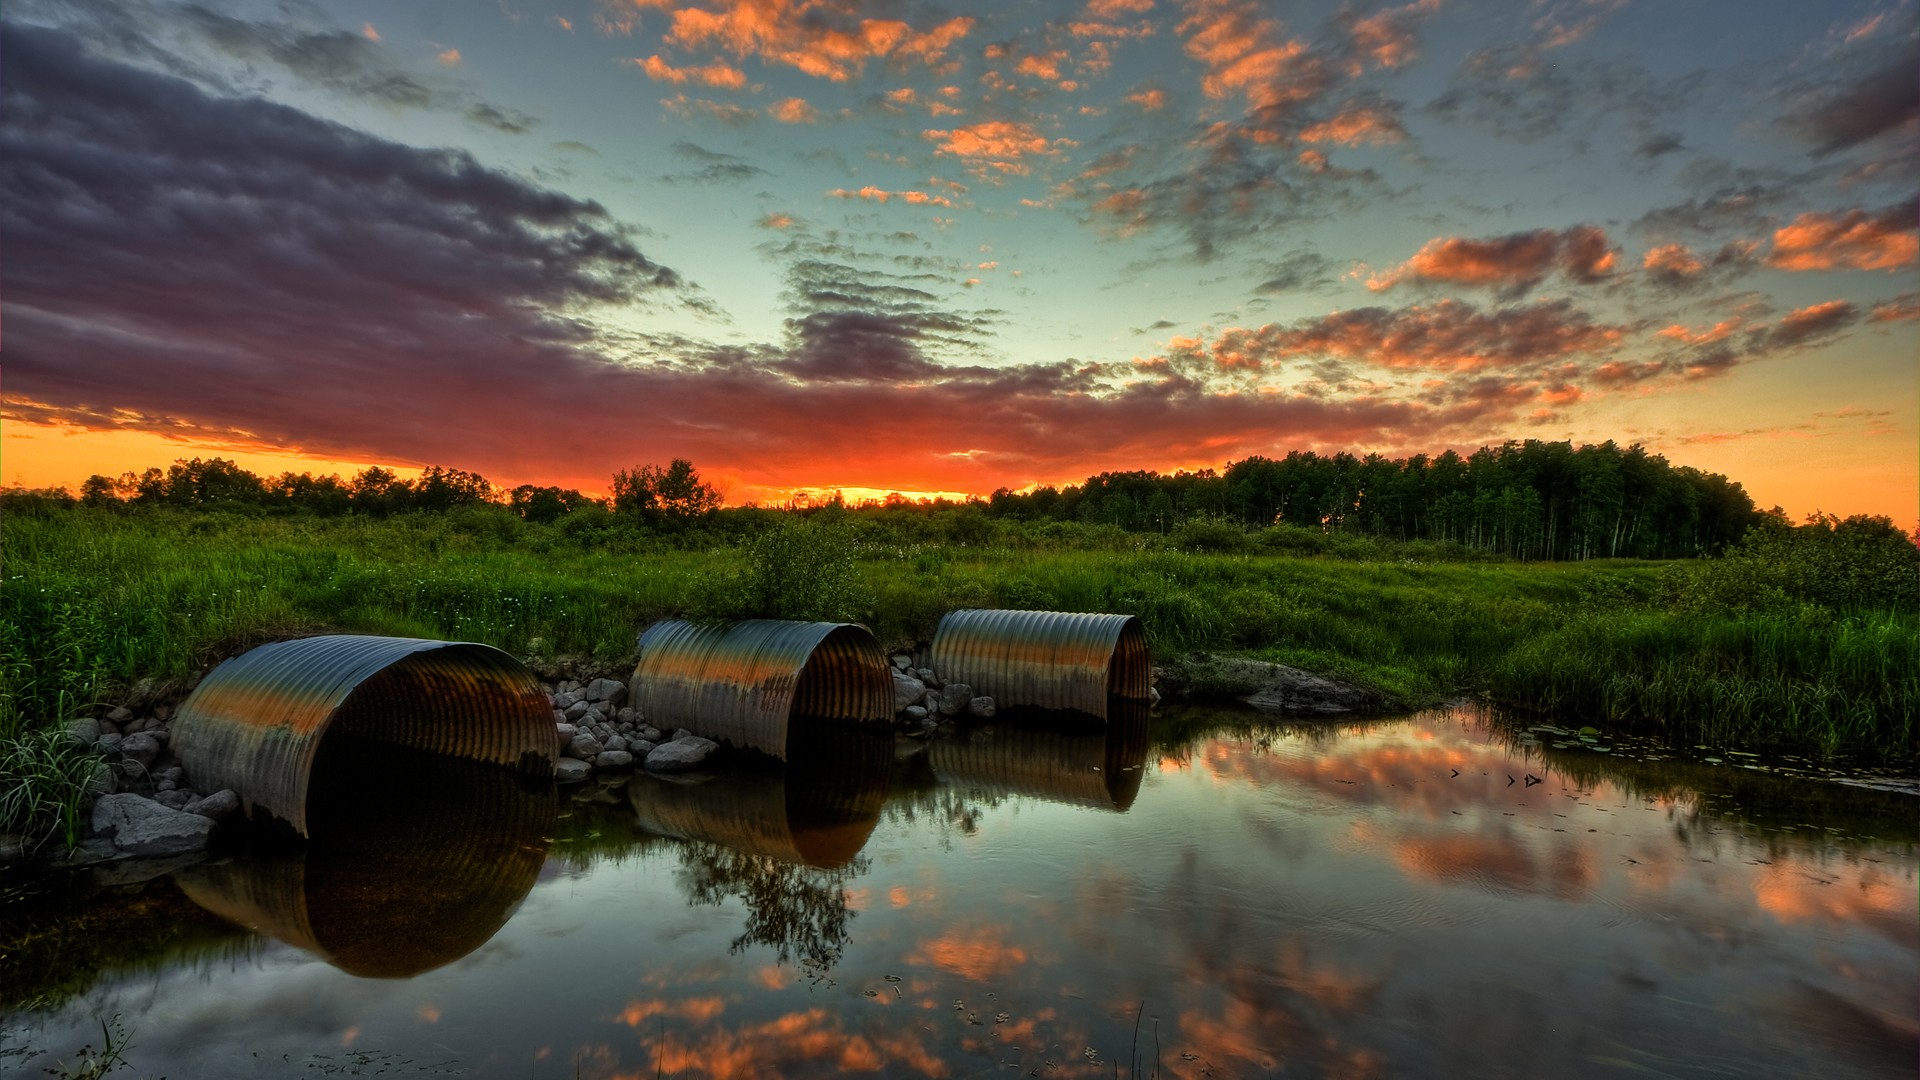 General 1920x1080 landscape nature sky clouds water reflection pipes